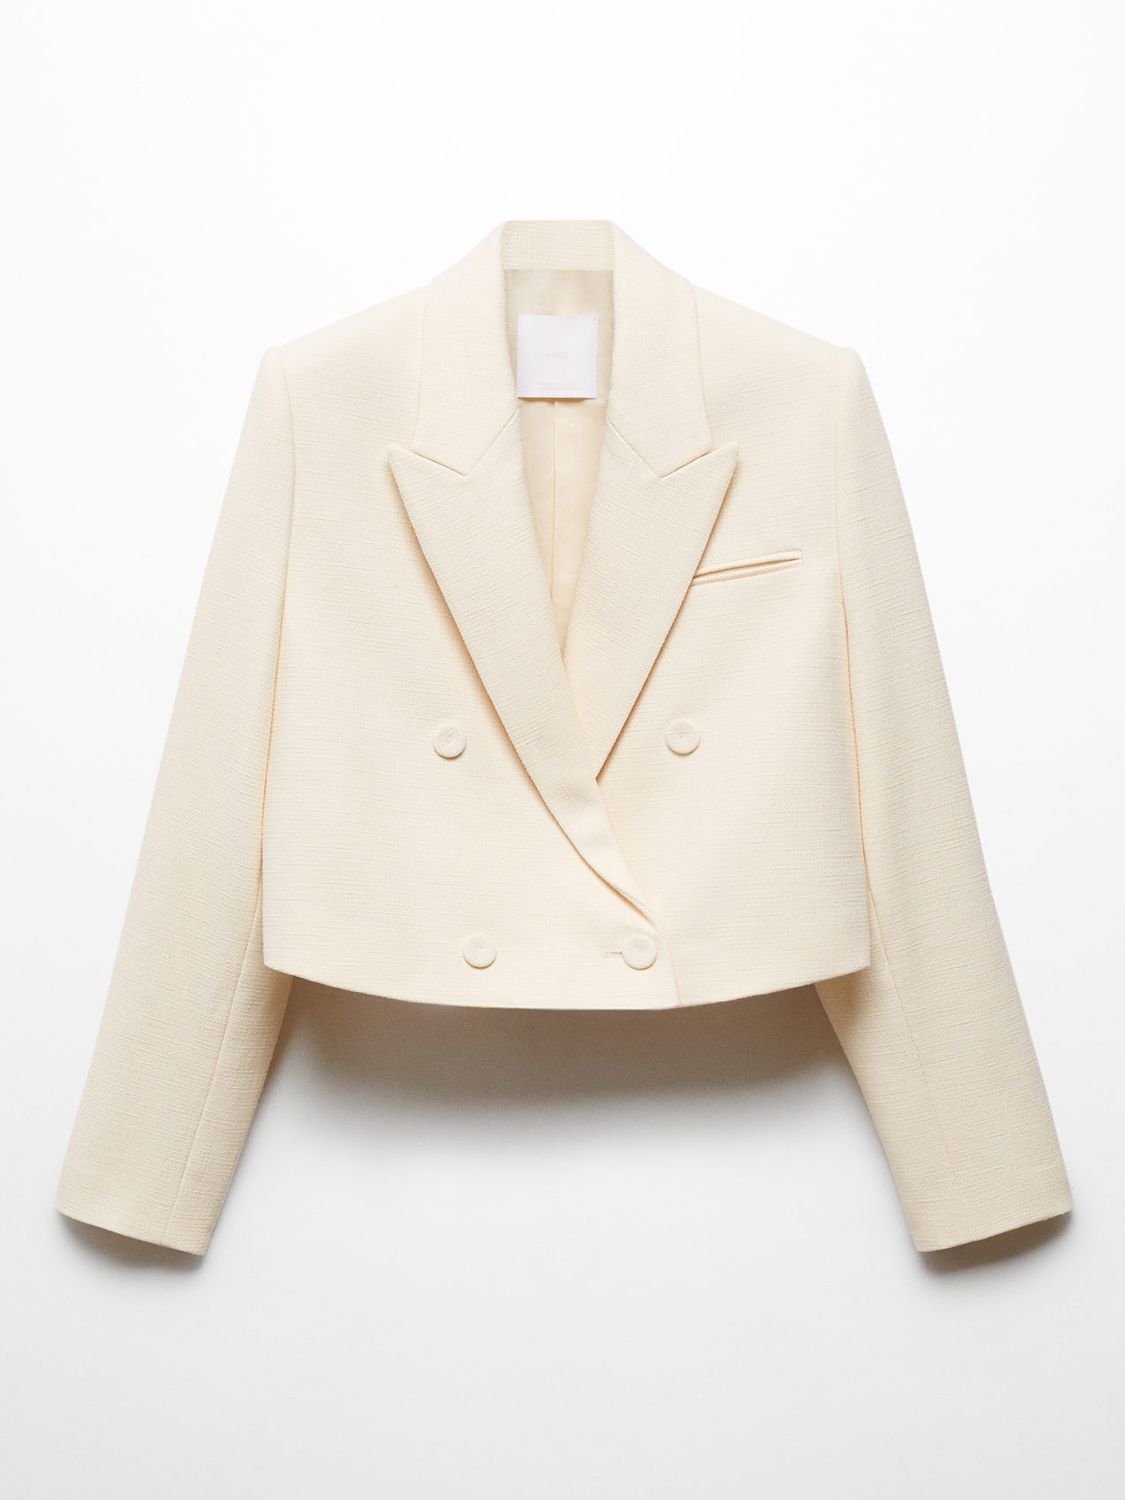 Buy Mango Granada Double Breasted Cropped Jacket, Cream Online at johnlewis.com